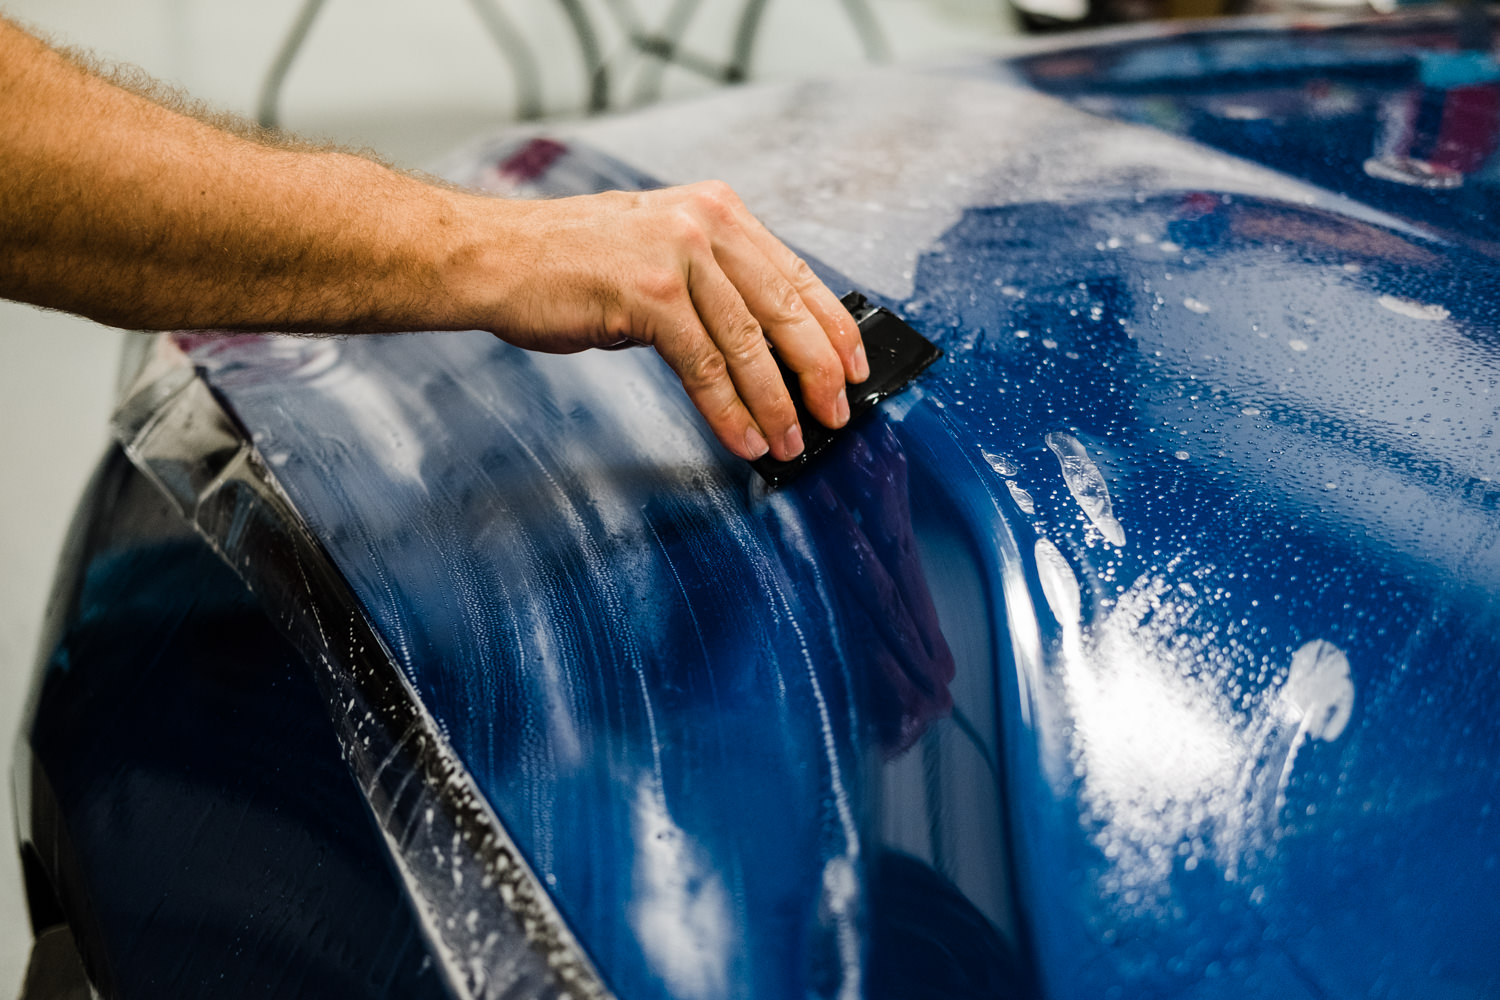 Ford Mustang GT - XPEL Paint Protection Film - Griot's Garage - Paint Correction - Ceramic Pro Coating - Ceramic Coating - XPEL Window Tint - Wichita Clear Bra-107.jpg